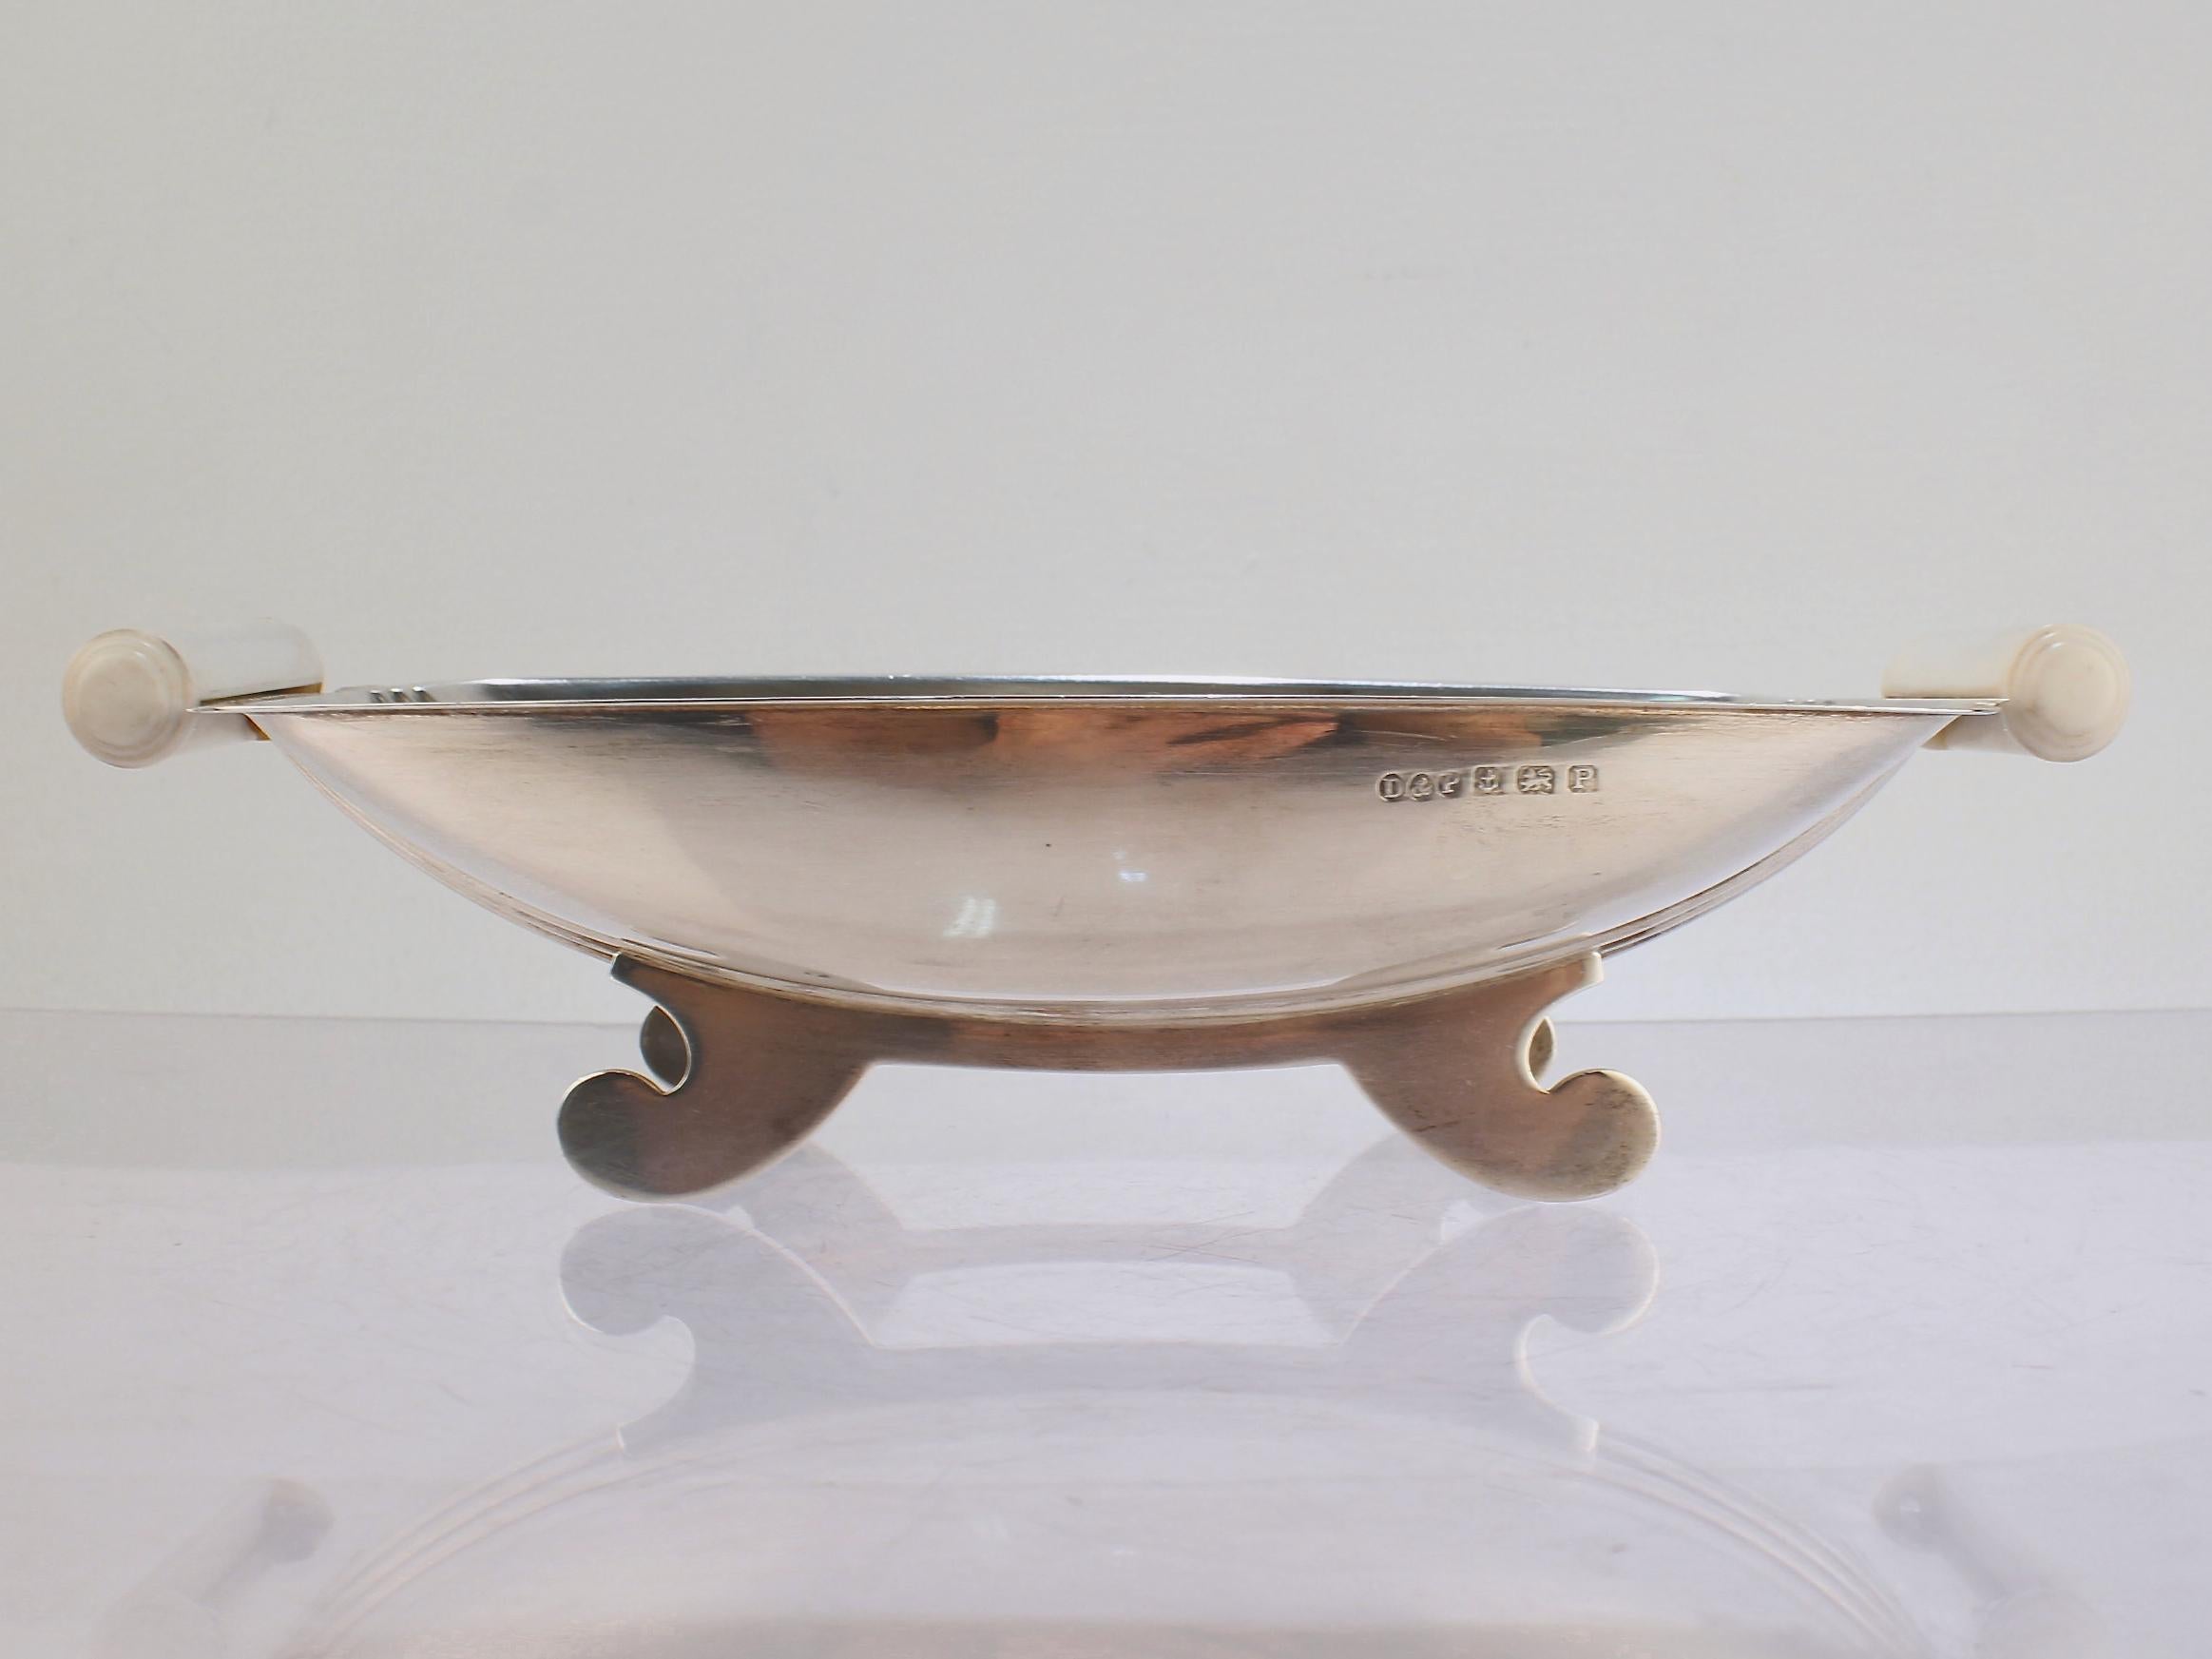 Antique Art Deco English Sterling Silver Footed Bowl with White Handles For Sale 1